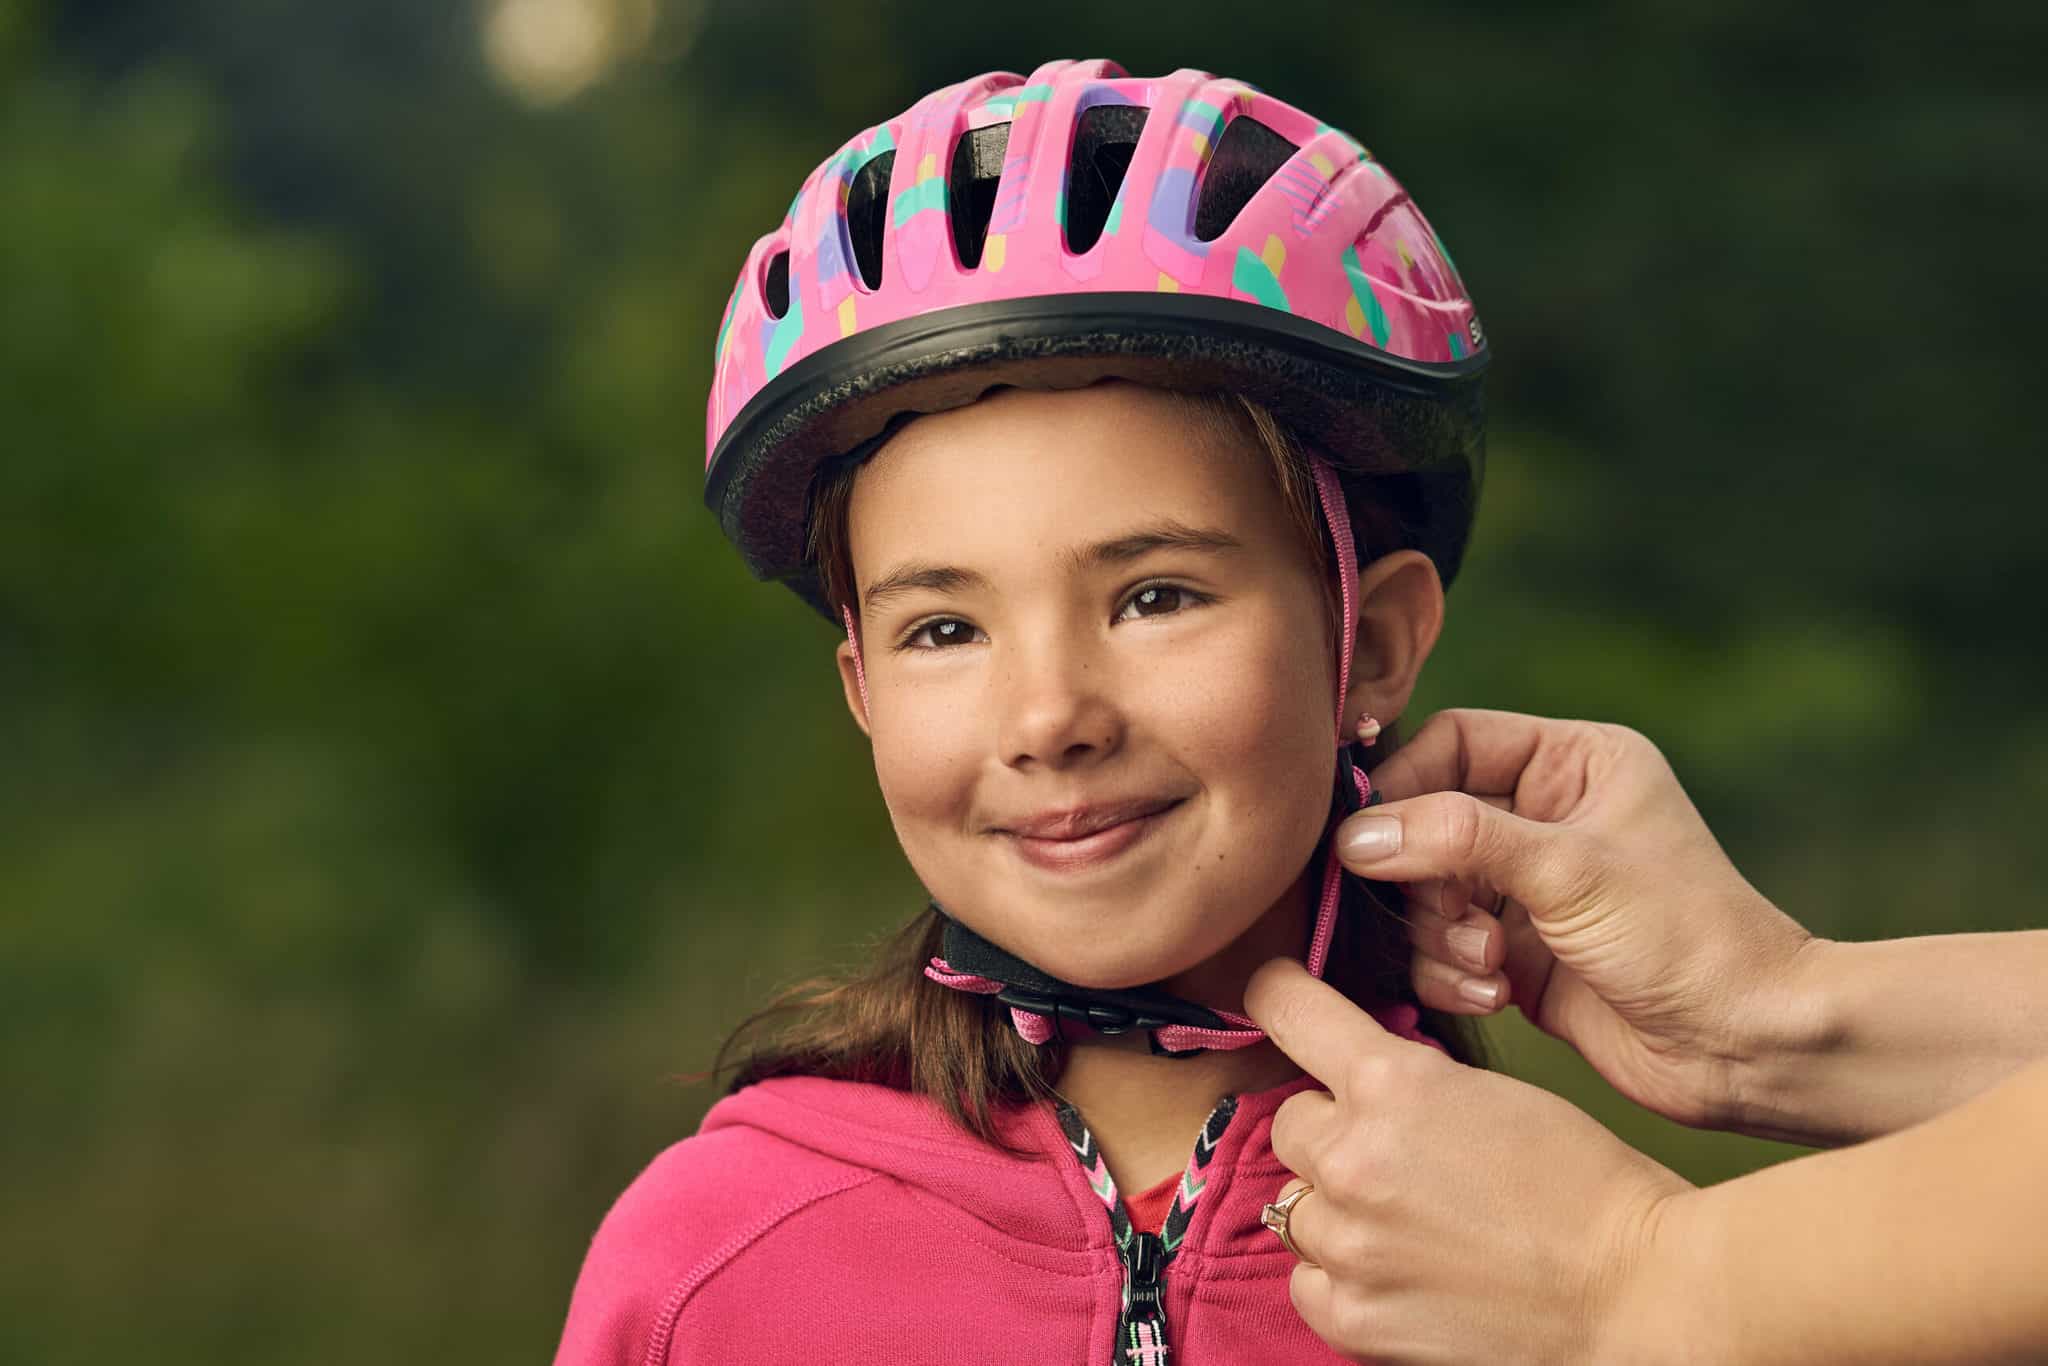 A young girl gets a bicycle helmet put on by an off-camera adult.